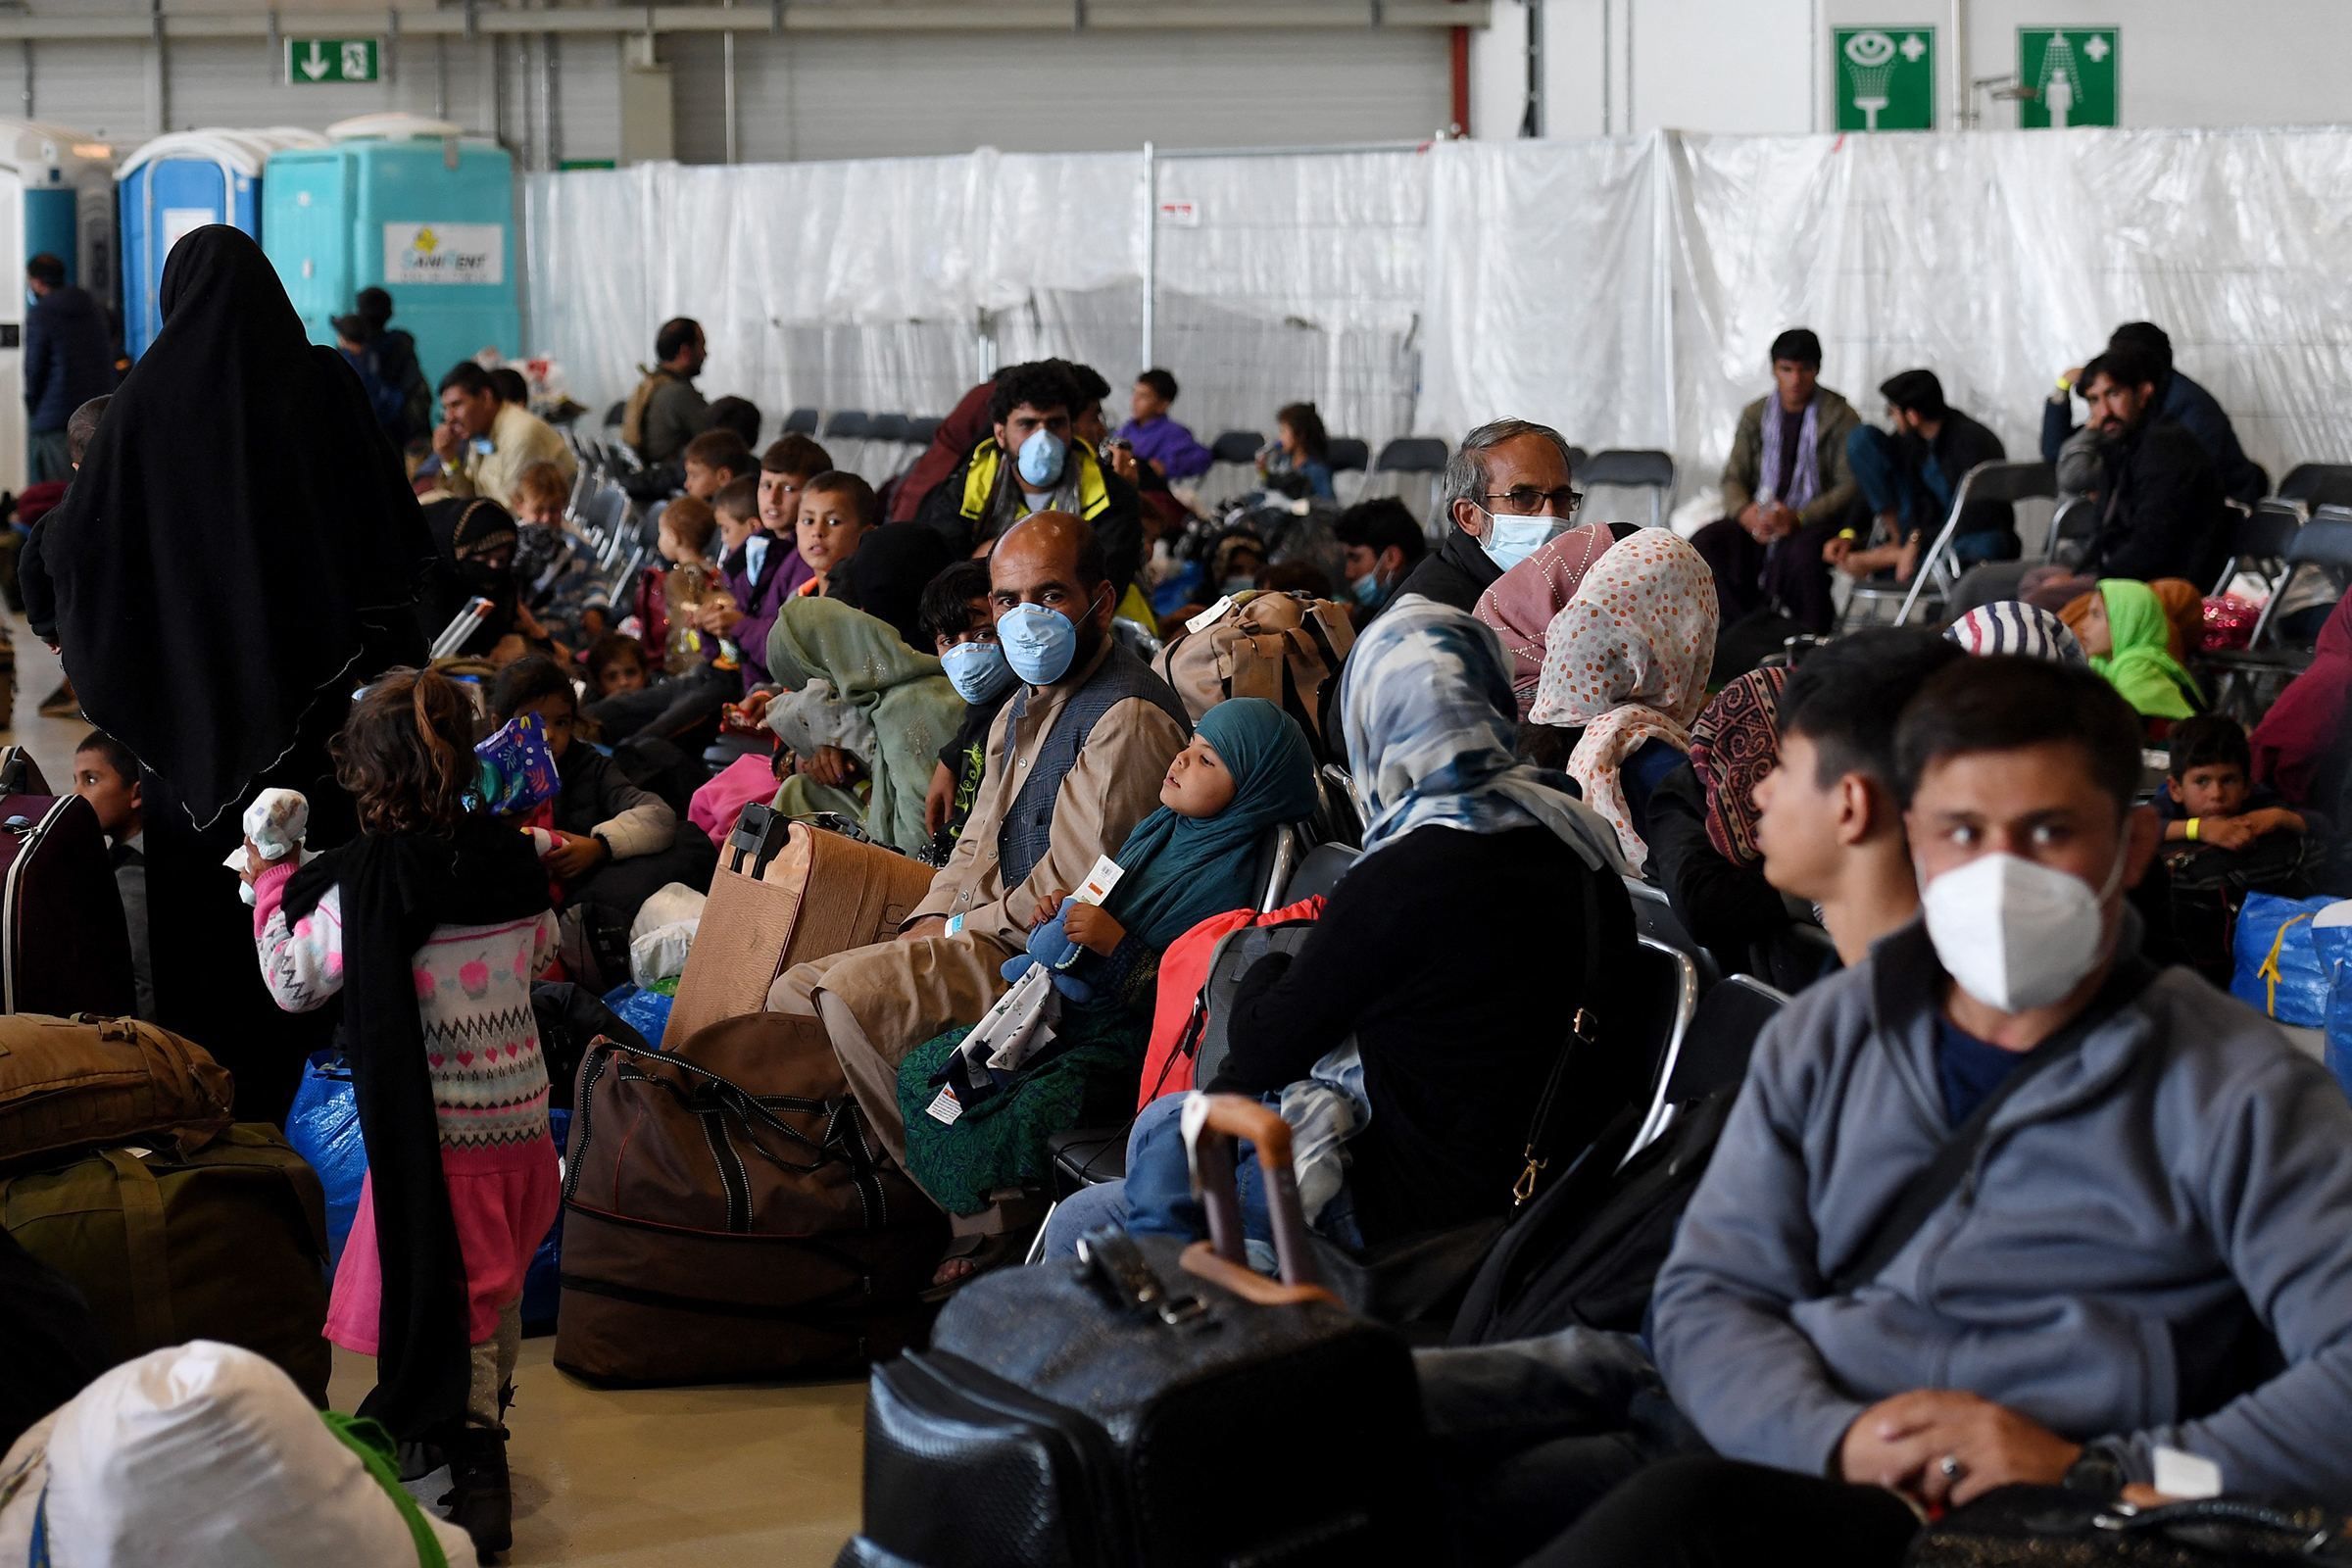 Afghan refugees are being processed inside Hangar 5 at Ramstein Air Base in Germany on September 8, 2021. (Photo by Olivier Douliery—Getty Images)